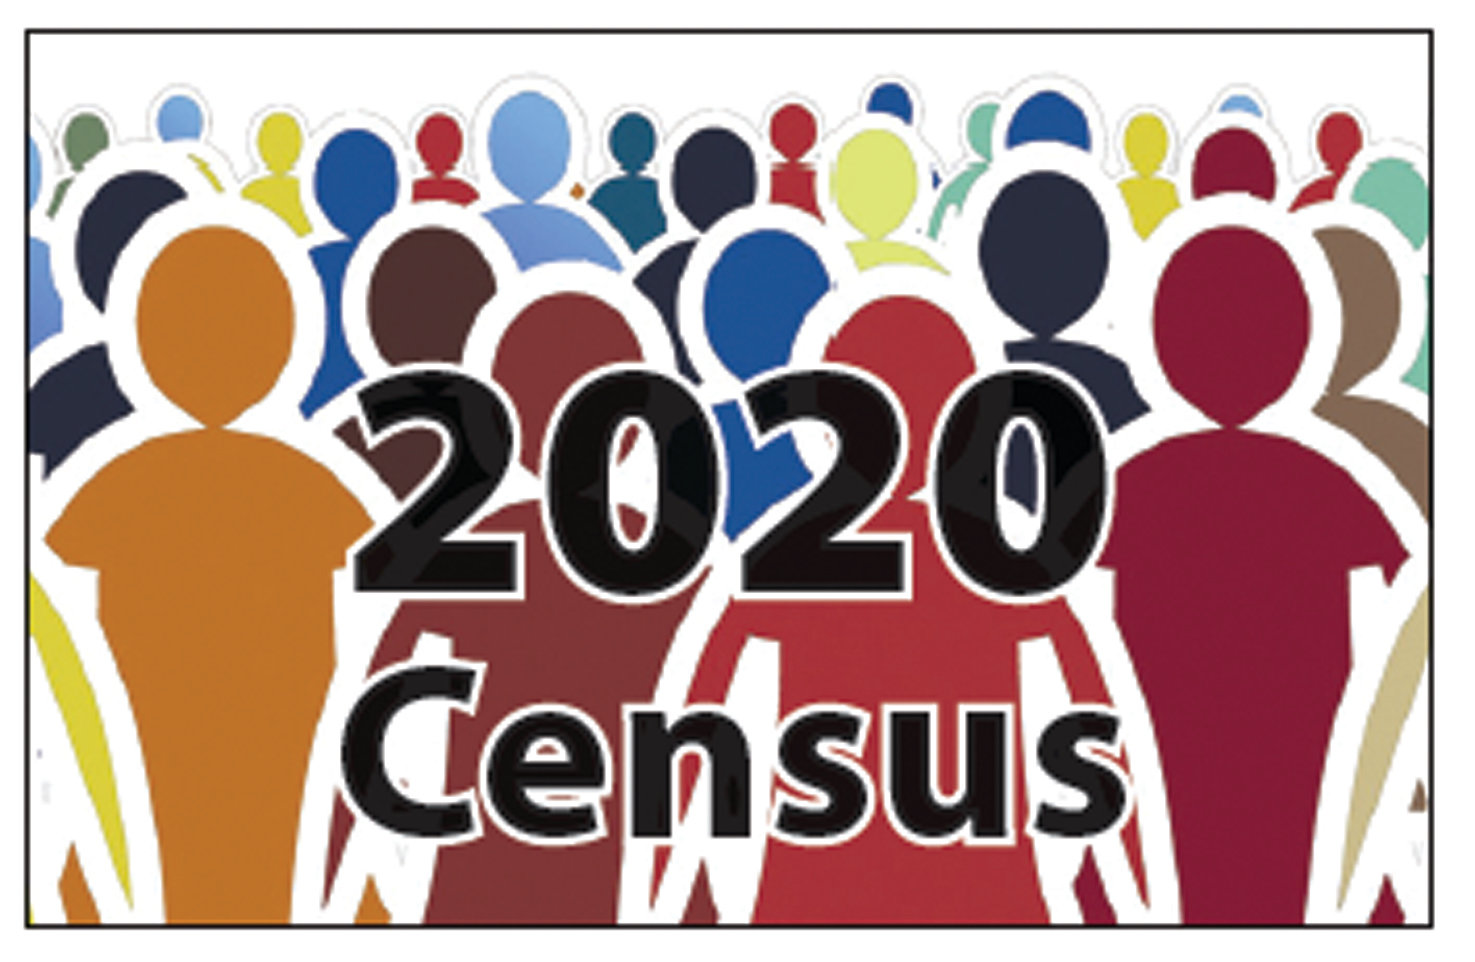 NEW JERSEY: 2020 Census